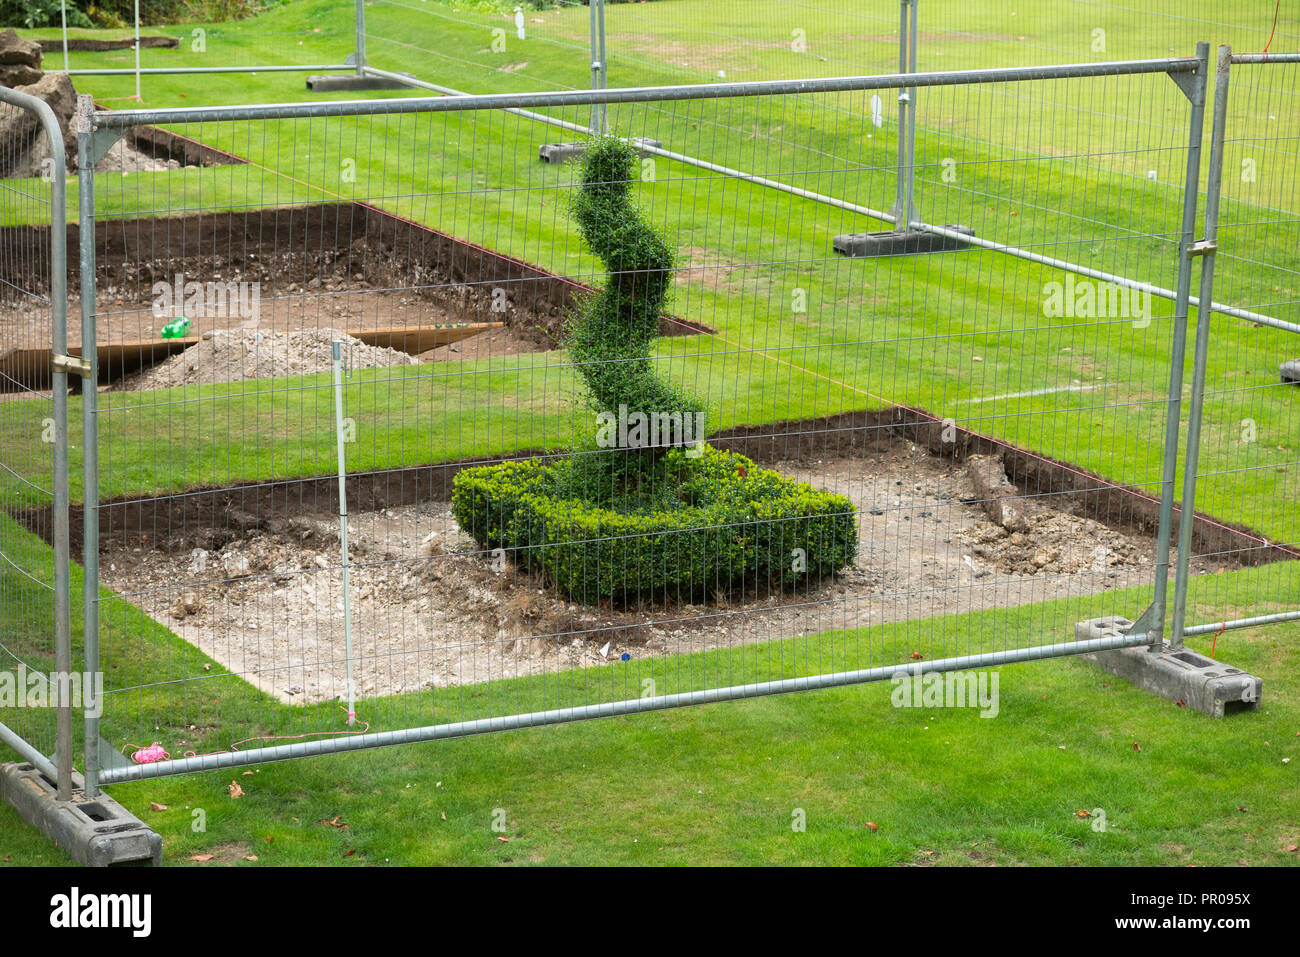 A metal screen / cage around a Box tree (Buxus) garden plant which symbolises protecting the plant and the fight against the Boxtree moth invasion. UK Stock Photo